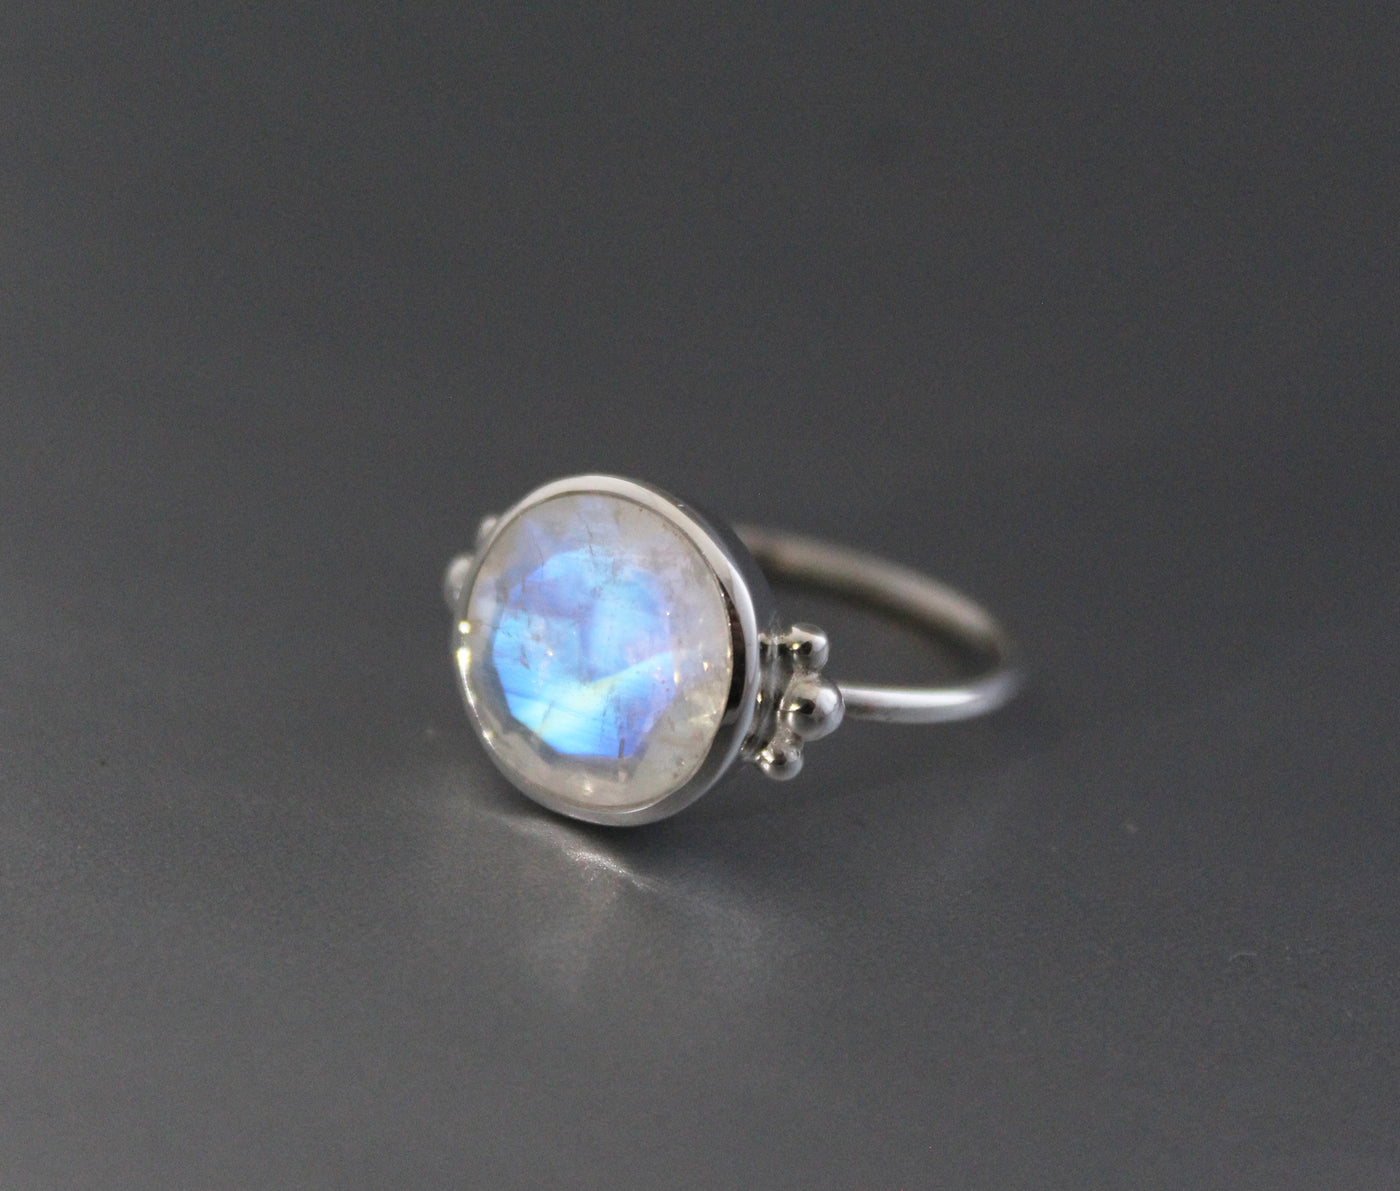 Natural Rainbow Moonstone Ring,Blue Fire Moonstone Ring,Boho Simple Ring ,Handmade Silver Ring,Gift for her,Promise Ring,Anniversary Ring